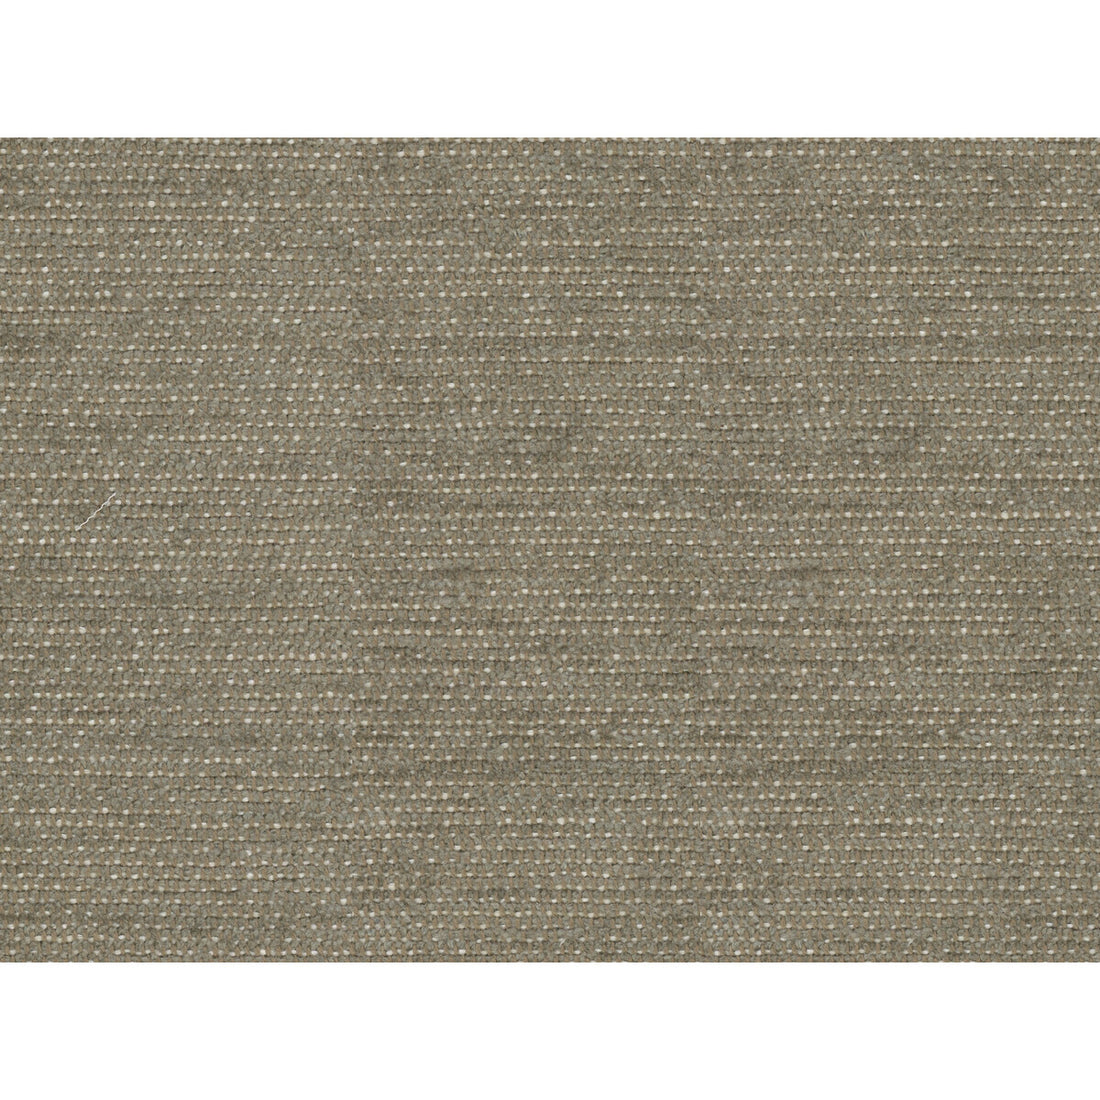 Revard Chenille fabric in grey color - pattern 8016107.11.0 - by Brunschwig &amp; Fils in the Chambery Textures collection